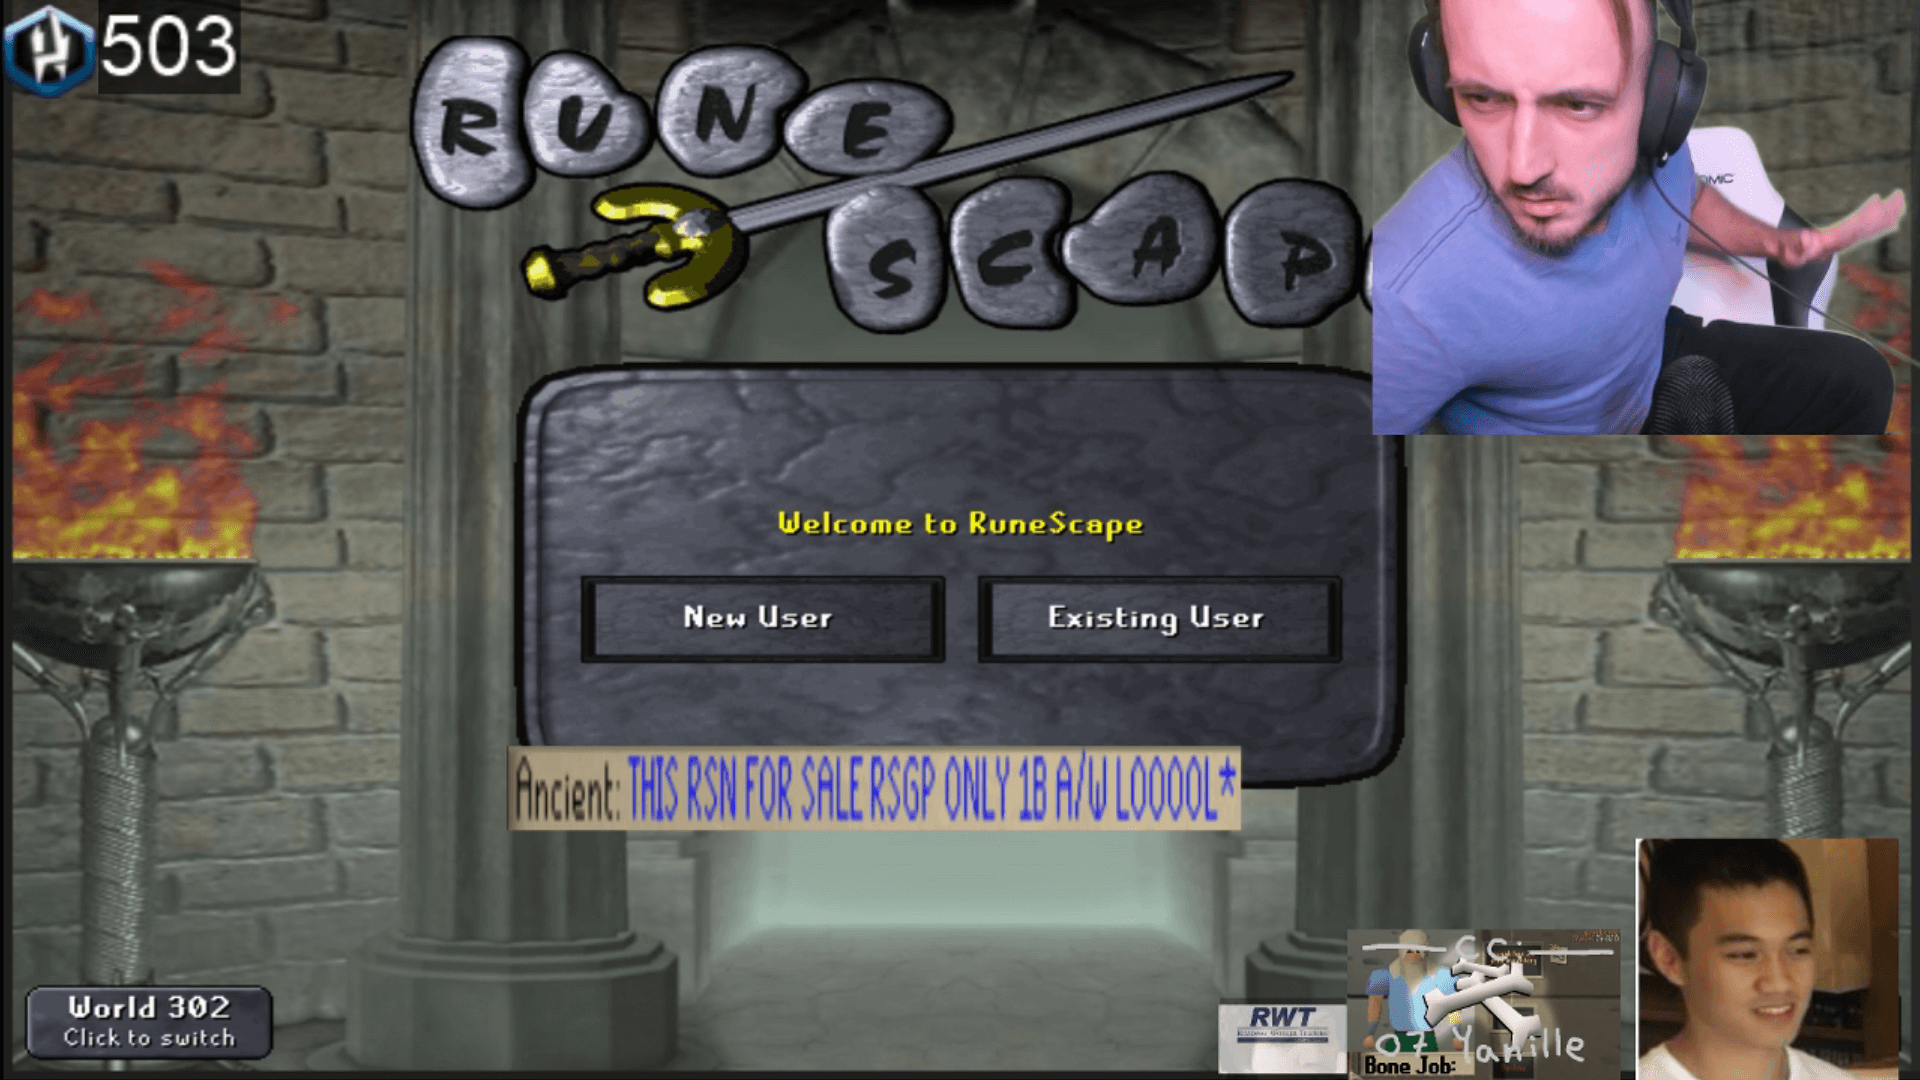 Hyphonix Loses 4 000 Worth Of Runescape Gold After Having An Account Banned Dot Esports